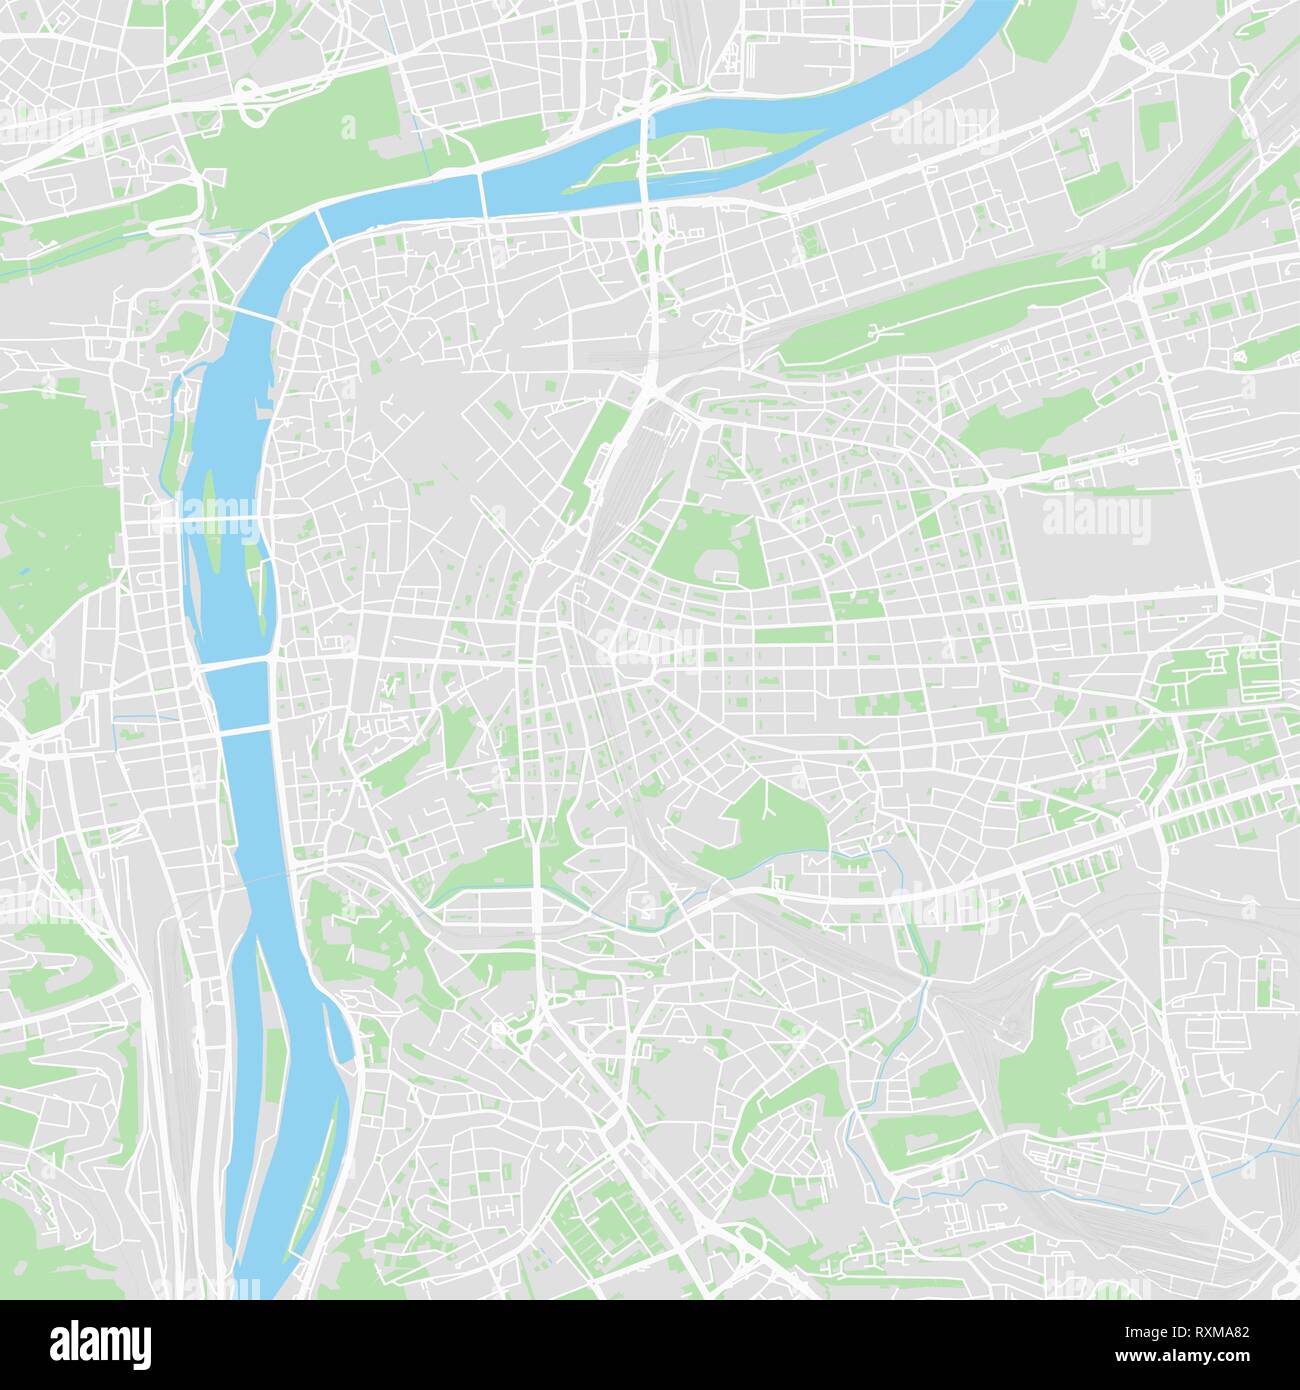 Downtown vector map of Prague, Czech Republic. This printable map of Prague contains lines and classic colored shapes for land mass, parks, water, maj Stock Vector